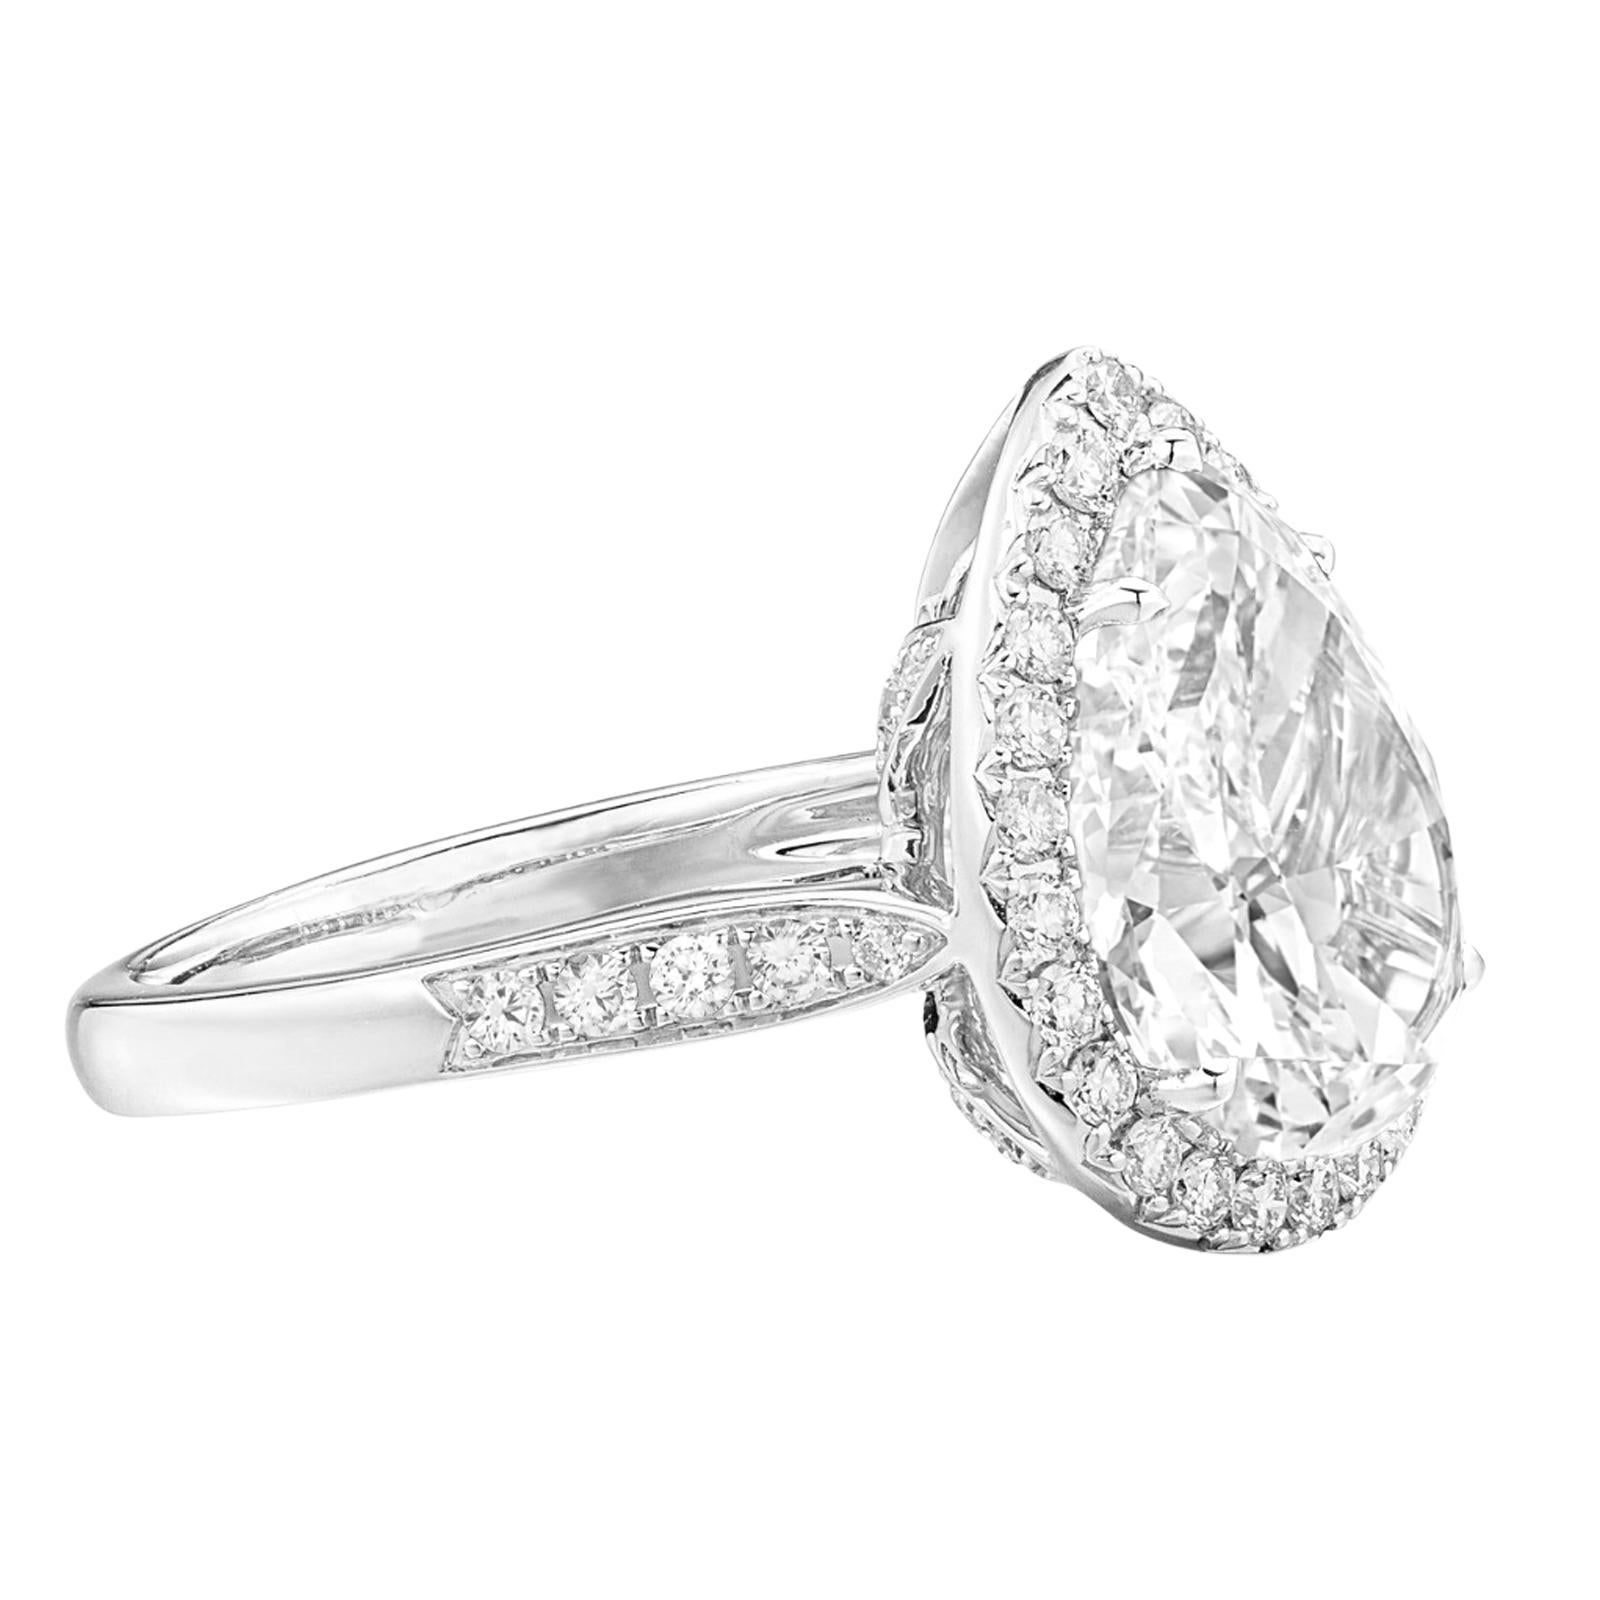 5 carat D color VS1 clarity GIA certified diamond with a halo and pave setting, elegantly nestled in 18k white gold. This exquisite diamond transcends mere luxury; it represents a strategic investment choice with undeniable potential for growth and